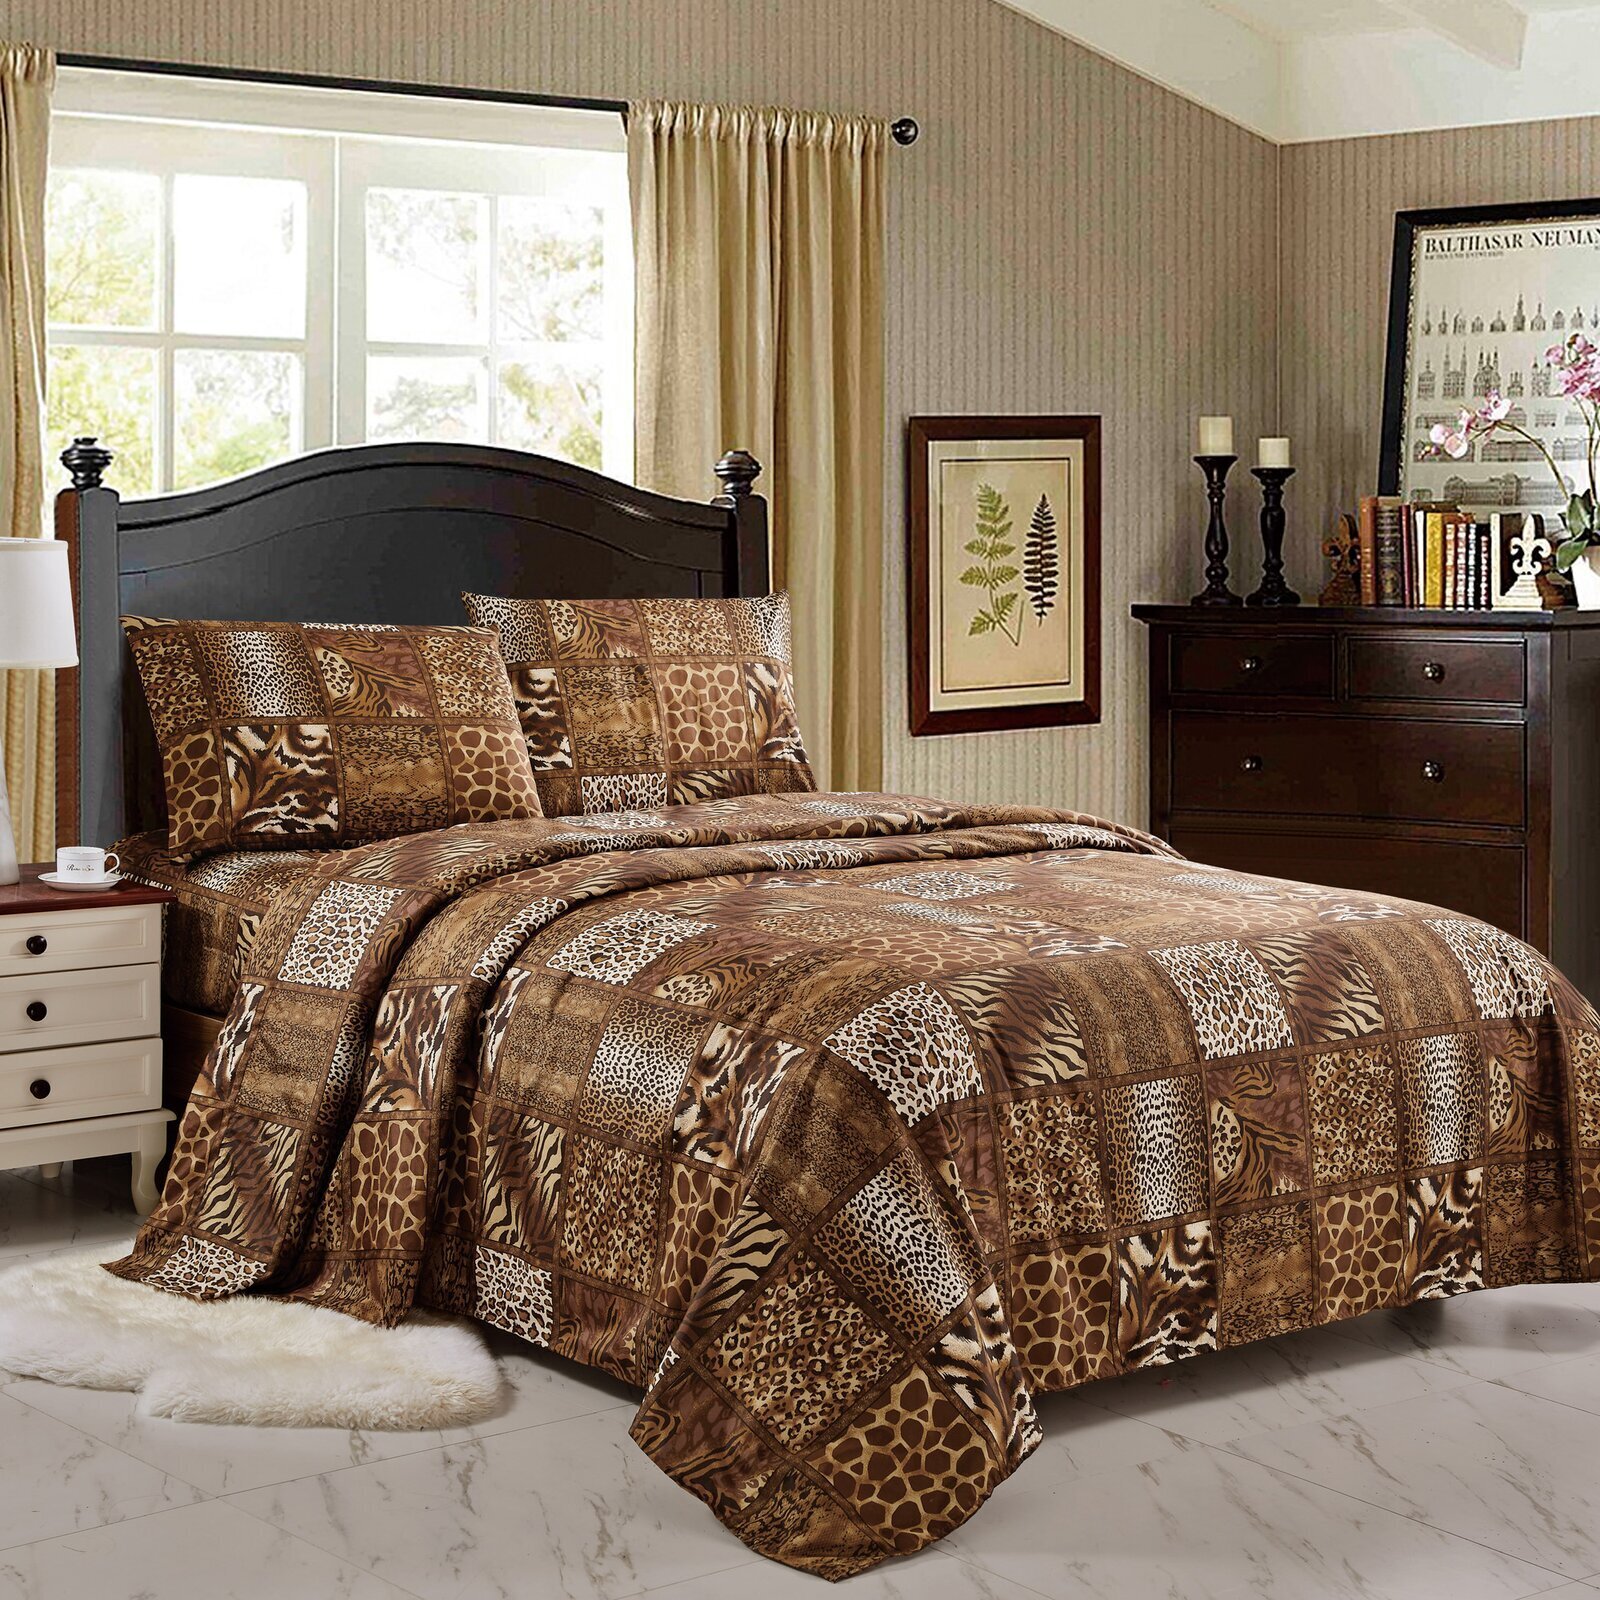 Assorted Animal and Leopard Print King Size Bedding